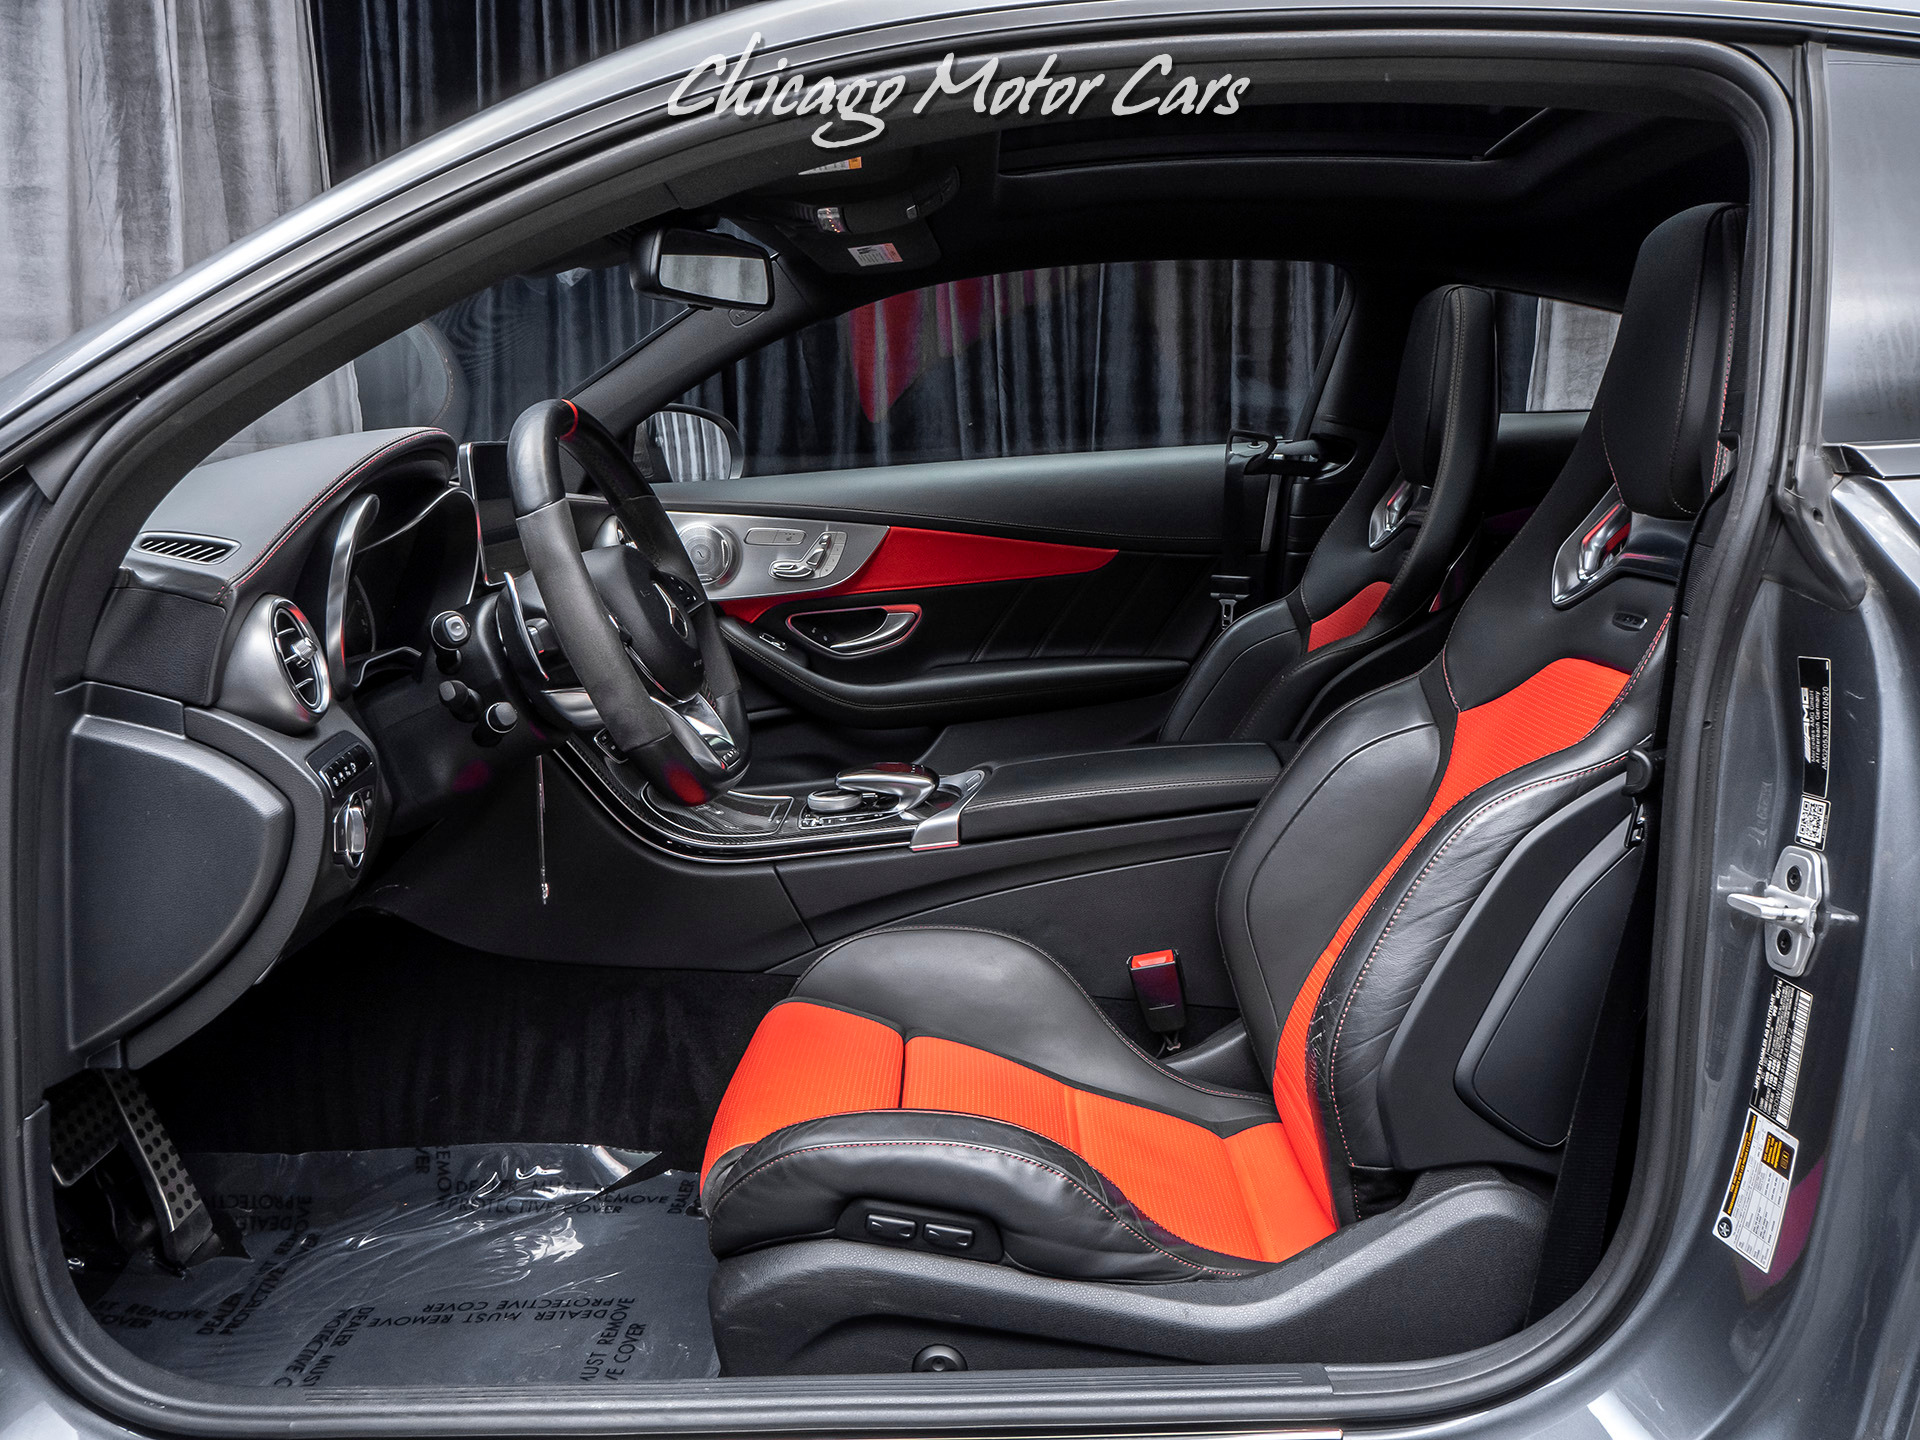 Used 17 Mercedes Benz C63 Amg S Coupe For Sale Special Pricing Chicago Motor Cars Stock